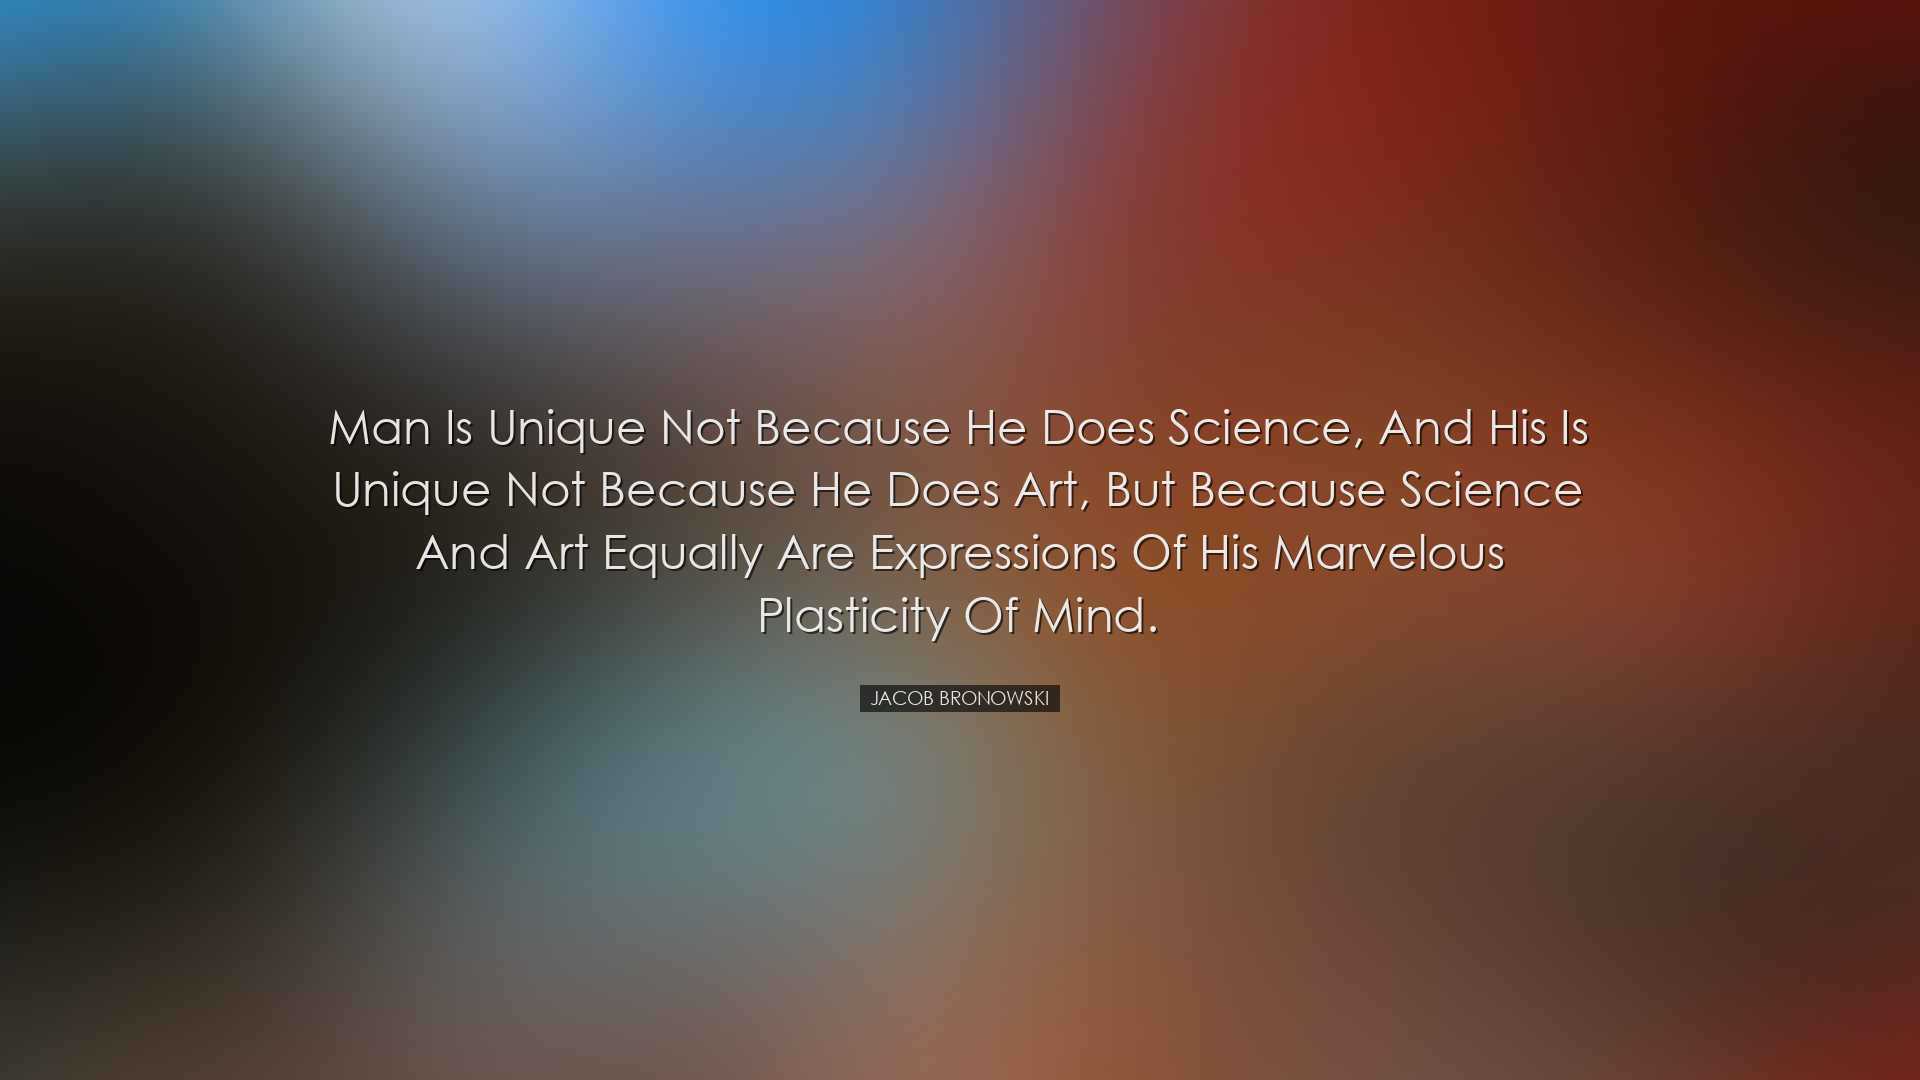 Man is unique not because he does science, and his is unique not b